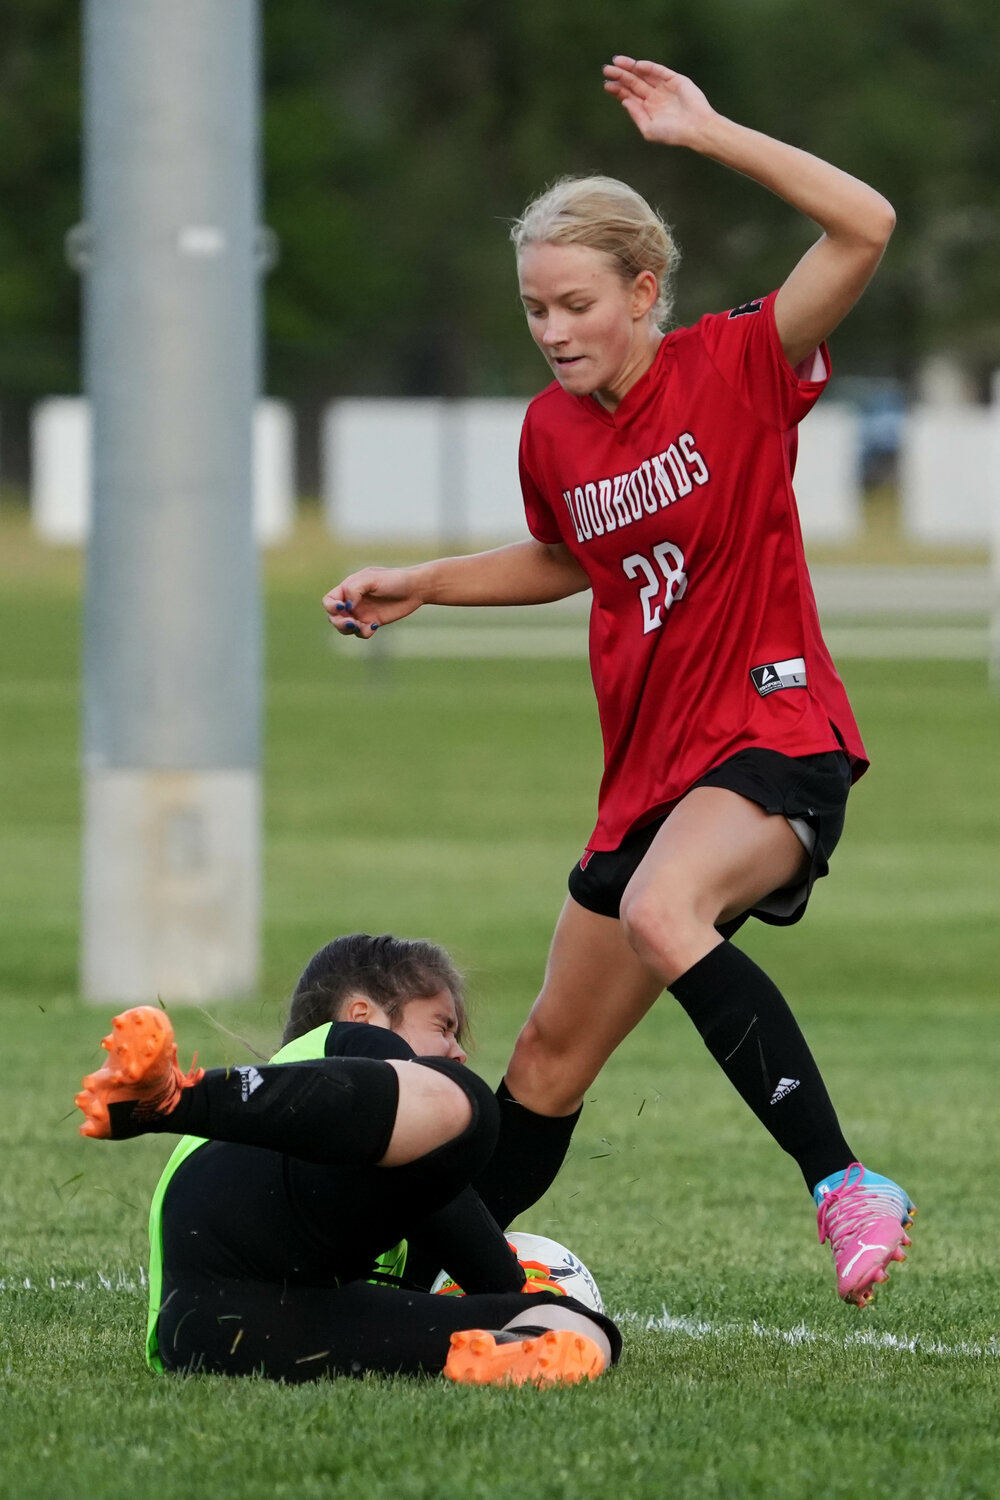 The Lady Hounds' Teagan Snaadt (28) collides with goalkeeper Kyla Muston during quarterinal action Friday, May 19,at Baxter Sports Complex.